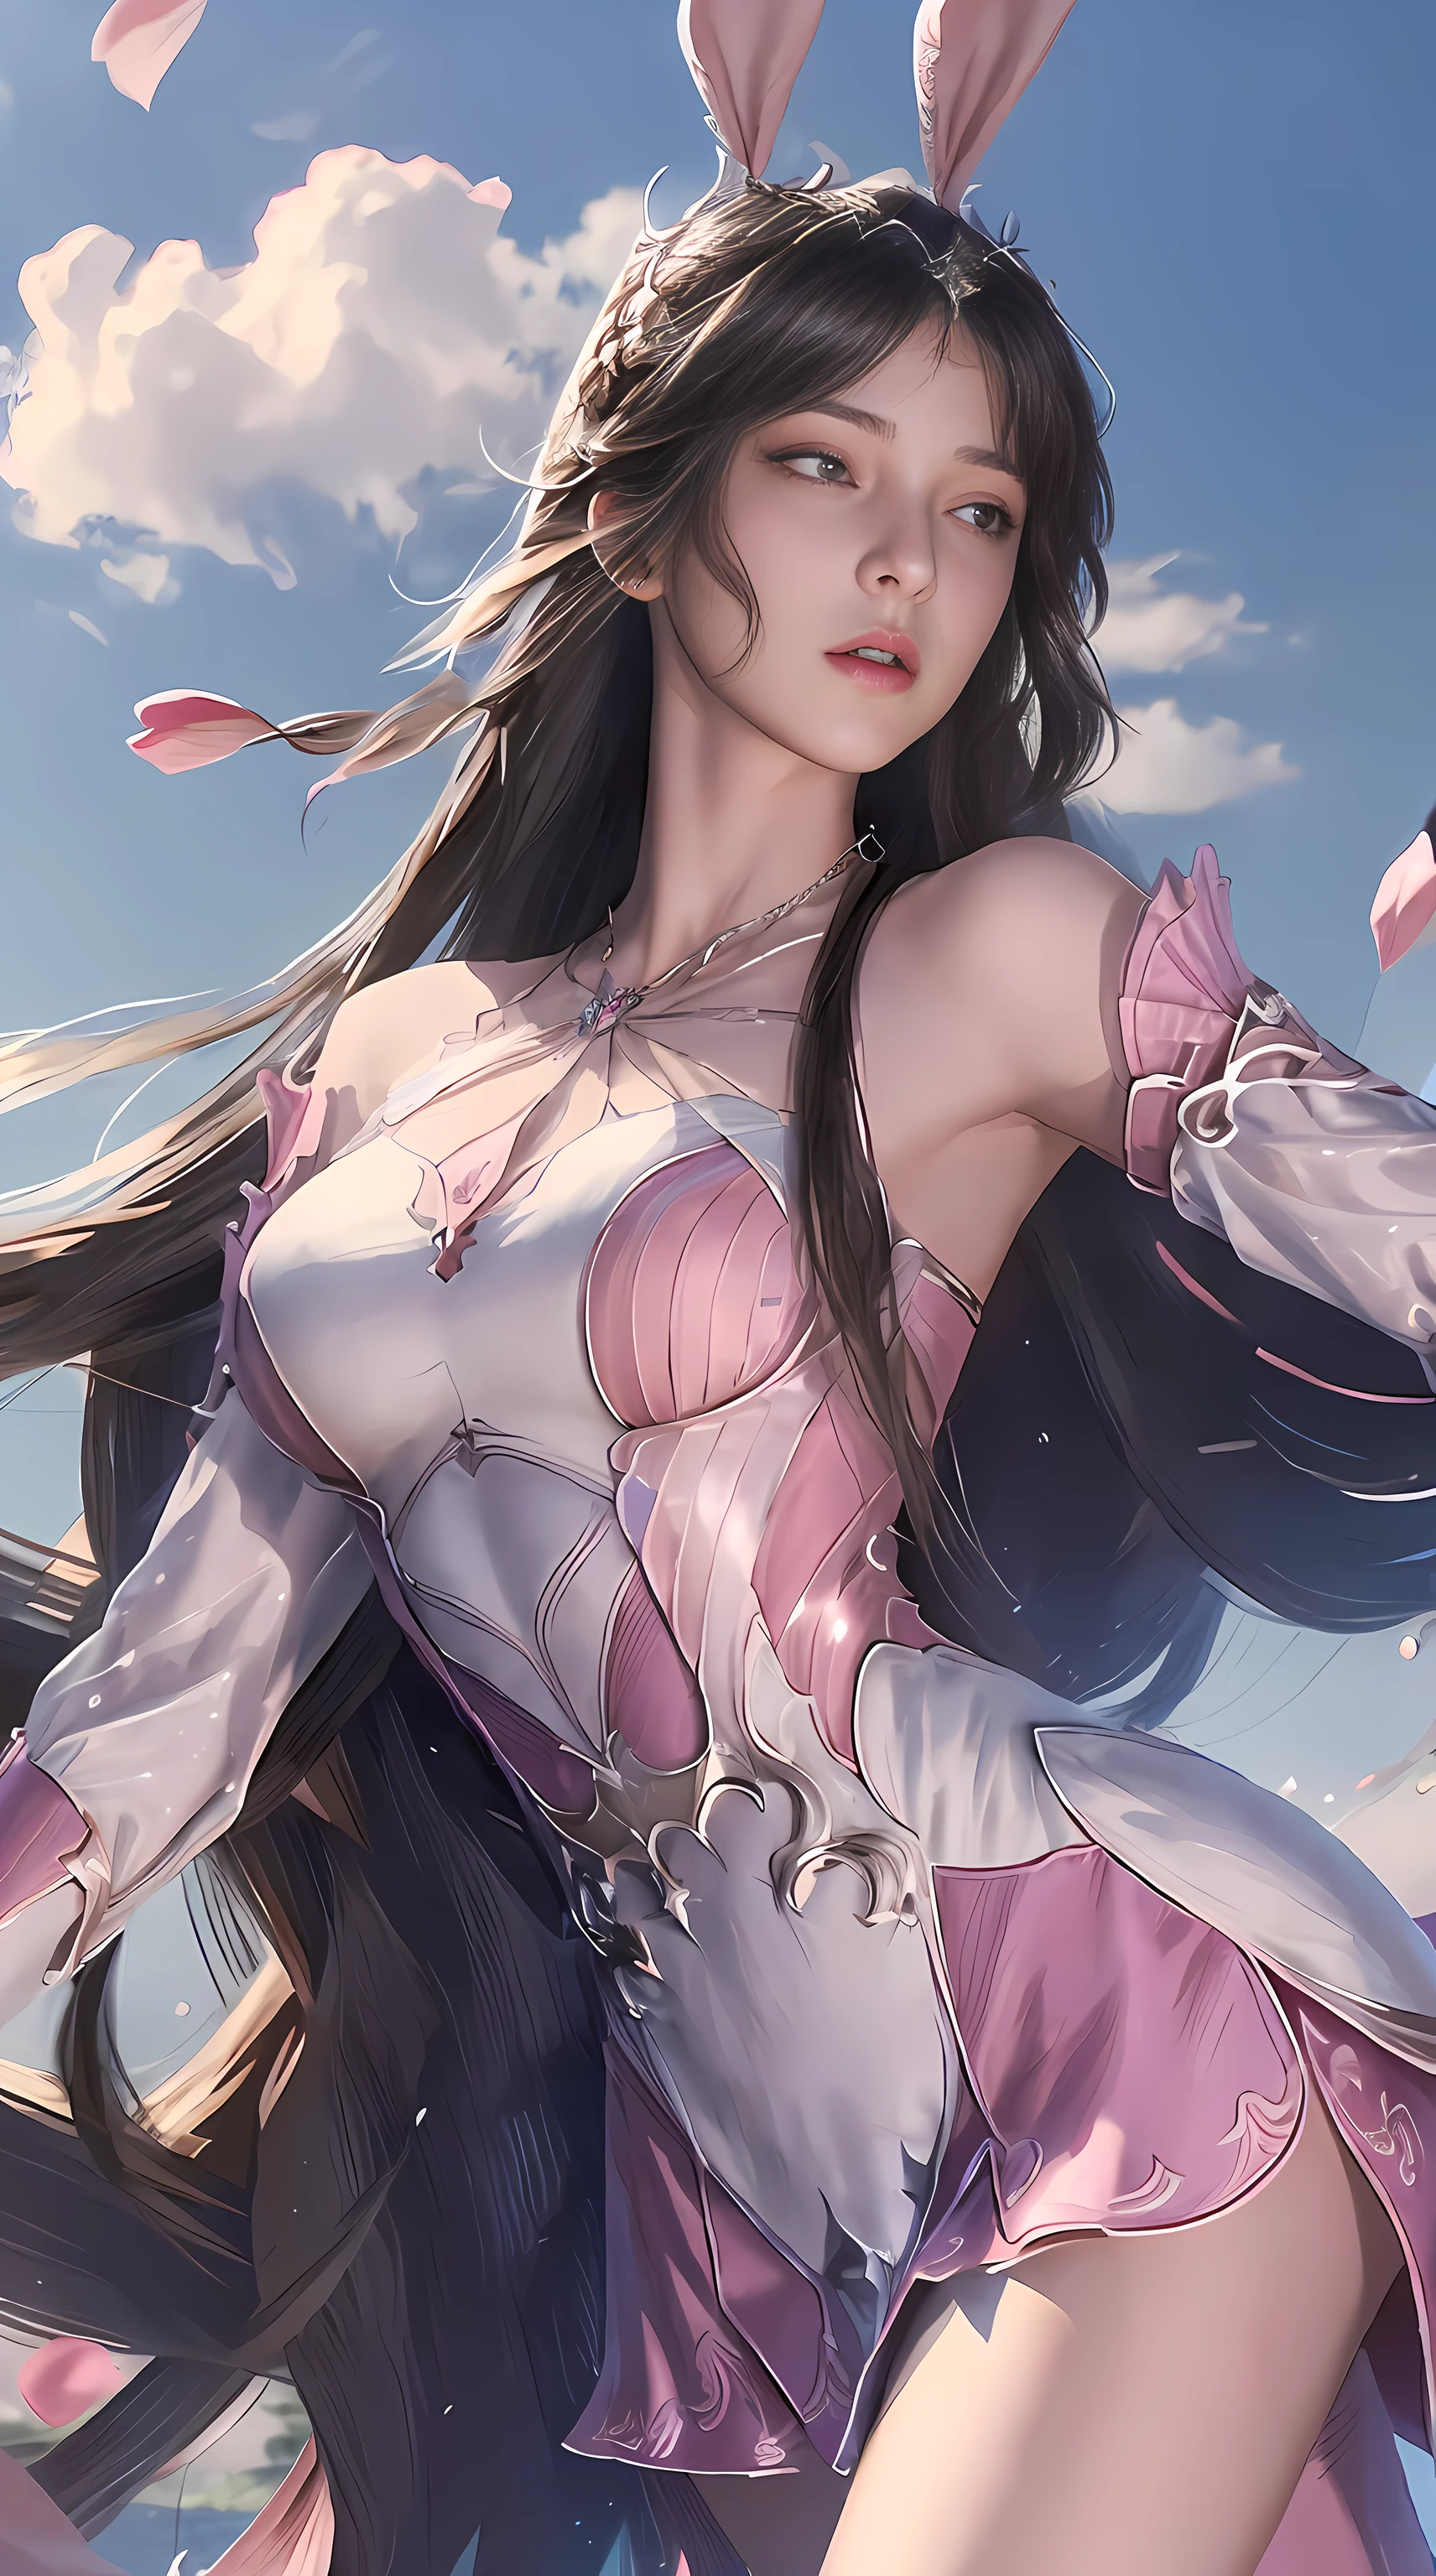 (1girl:1.3), Solo, __body-parts__, Official Art, Unity 8k Wallpaper, Ultra Detailed, Beautiful and Aesthetic, Masterpiece, Best Quality, RAW, Super Fine Photo, Best Quality, Ultra High Resolution, Photorealistic Photorealism, Sunlight, Full Body Portrait, Amazing Beauty, Delicate Face, Vibrant Eyes, (From the Front), Detailed Face, Gorgeous, Highly Detailed Skin, Realistic Skin Details, Visible Pores, Sharp Focus, Volume Fog, 8K uhd, DSLR, high quality, film grain, fair skin, photo realism, brunette hair, brunette hair, breasts, open eyes, split sleeves, skinny, transparent, pink, dress, transparent panties, pink, twisted braid, long braid, jewelry, gold accessories, gorgeous accessories, complex, delicate lips, long hair, medium breasts, outdoor, closed lips, petals, peach blossoms, rabbit ears, pink rabbit ears, standing, dynamic pose, upper body